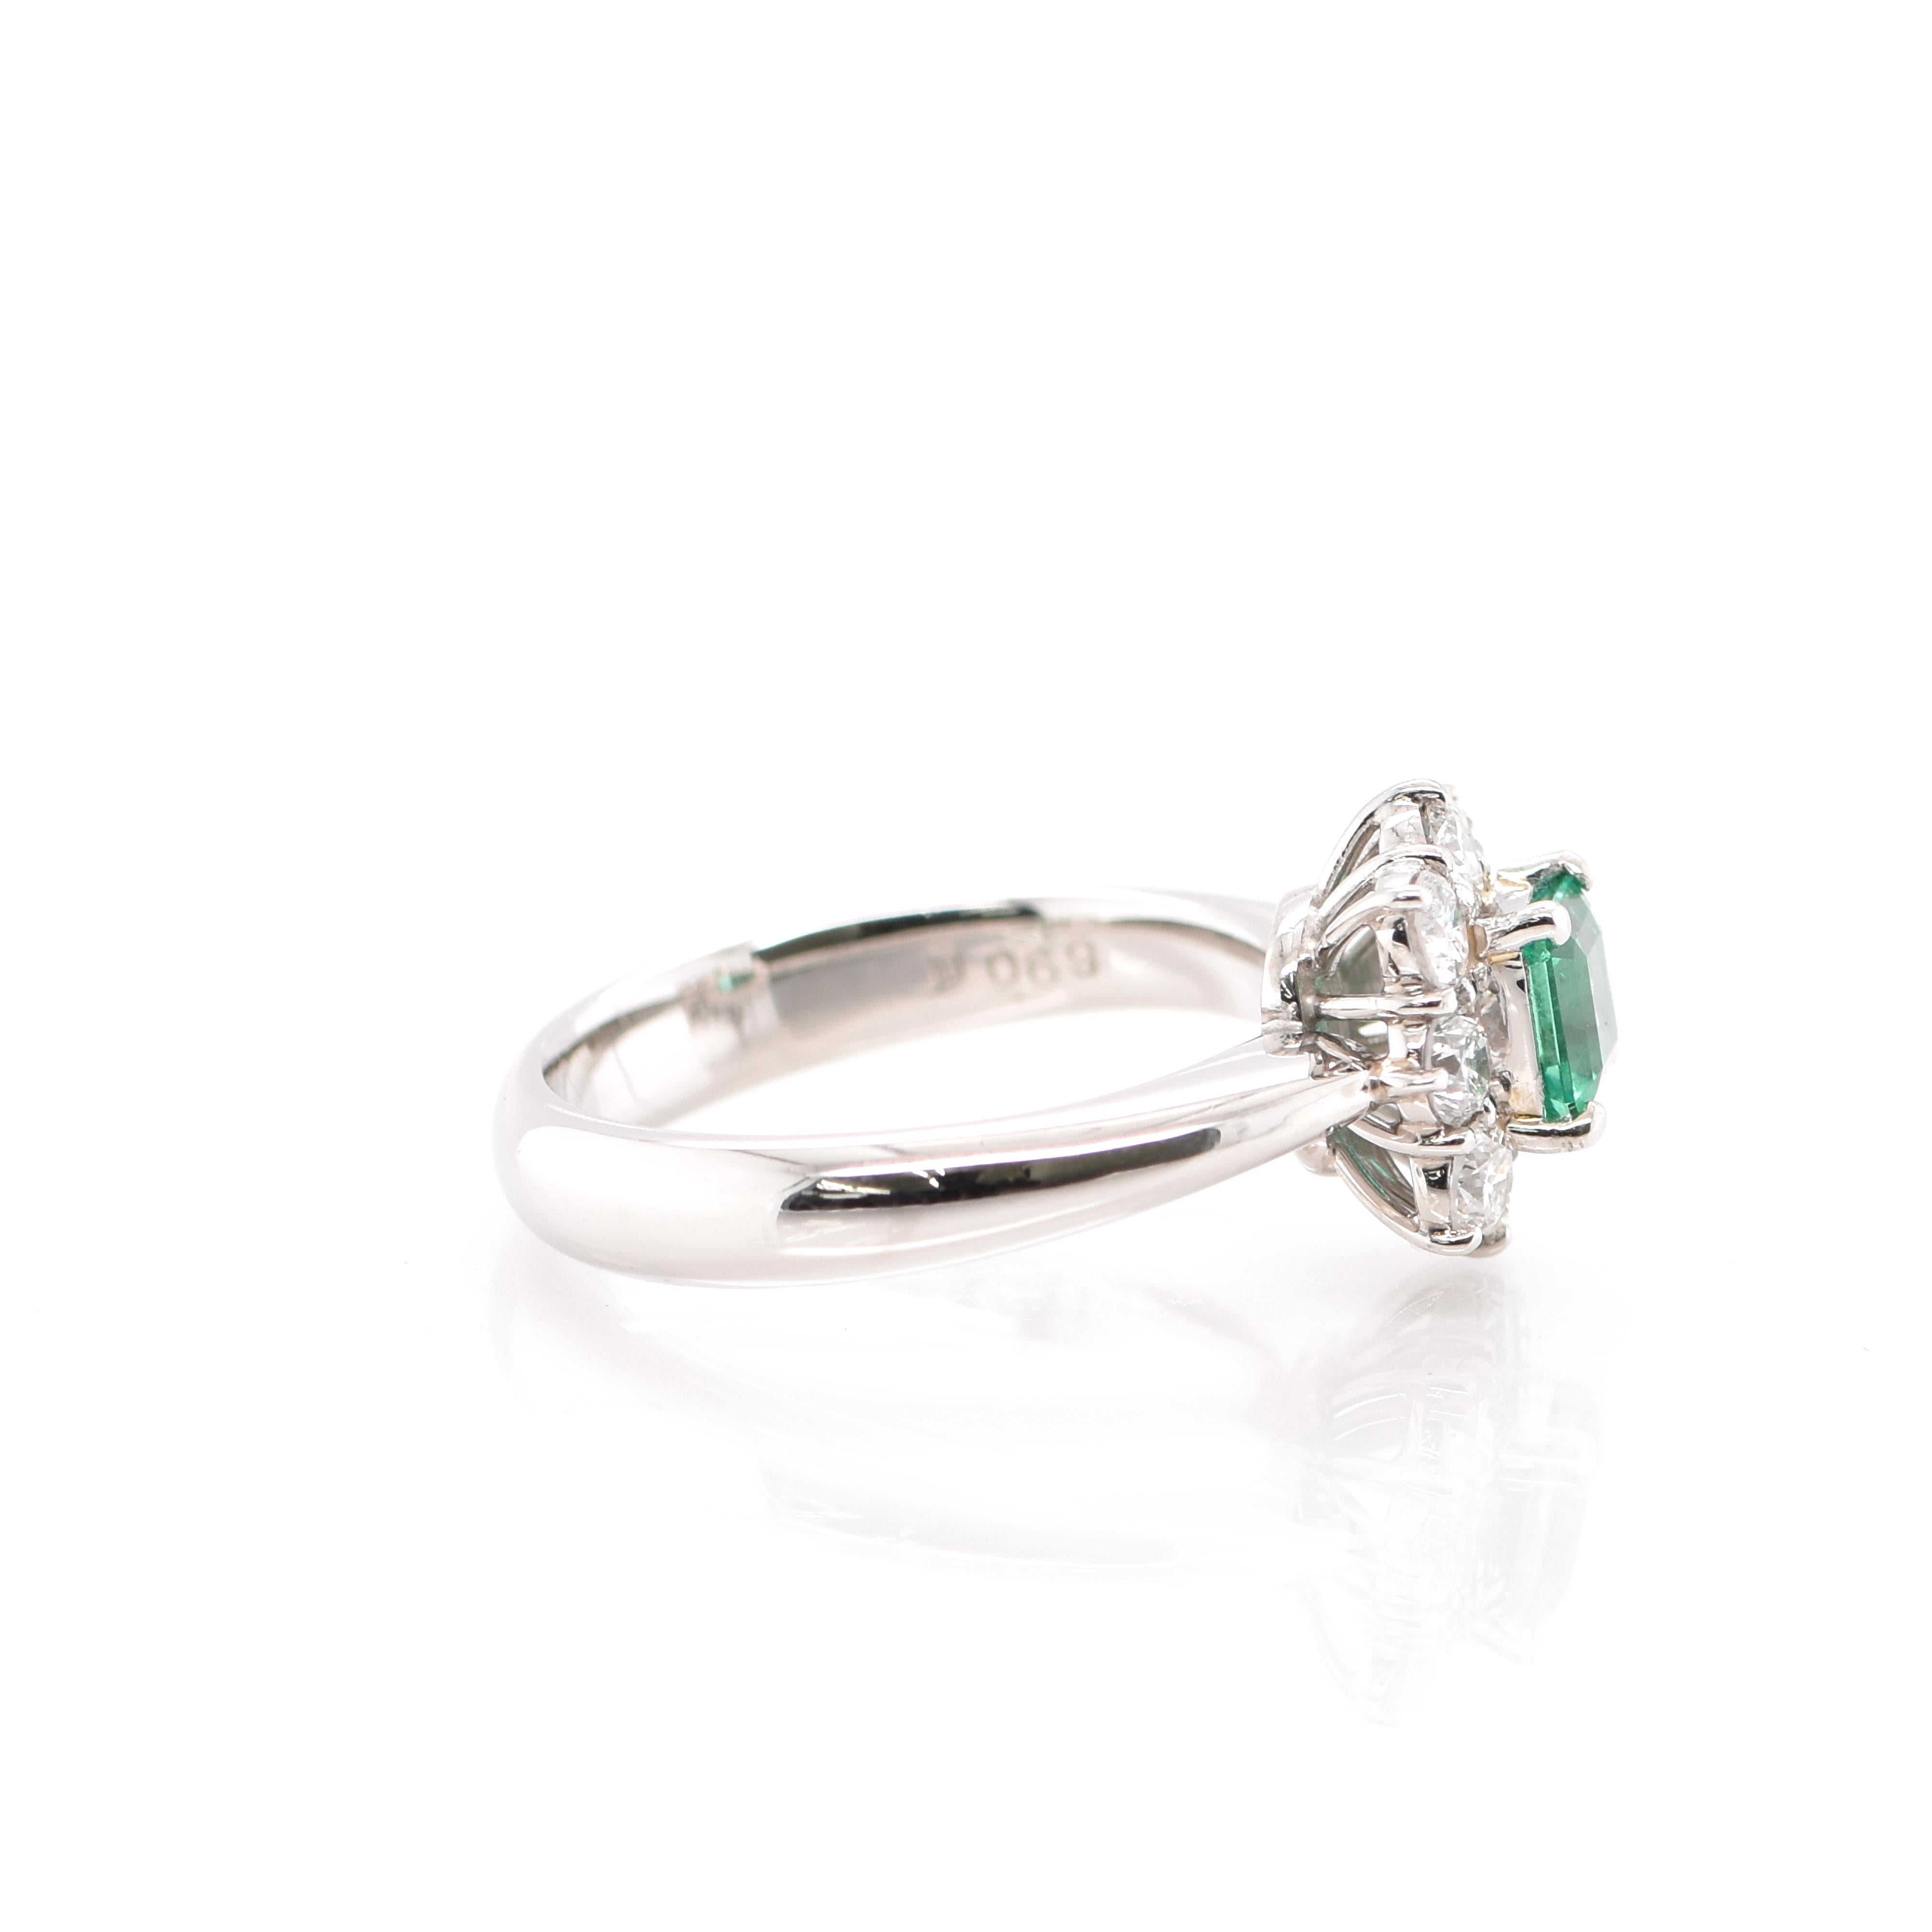 Women's GIA 0.61 Carat No Oil Colombian Emerald and Diamond Ring Set in Platinum